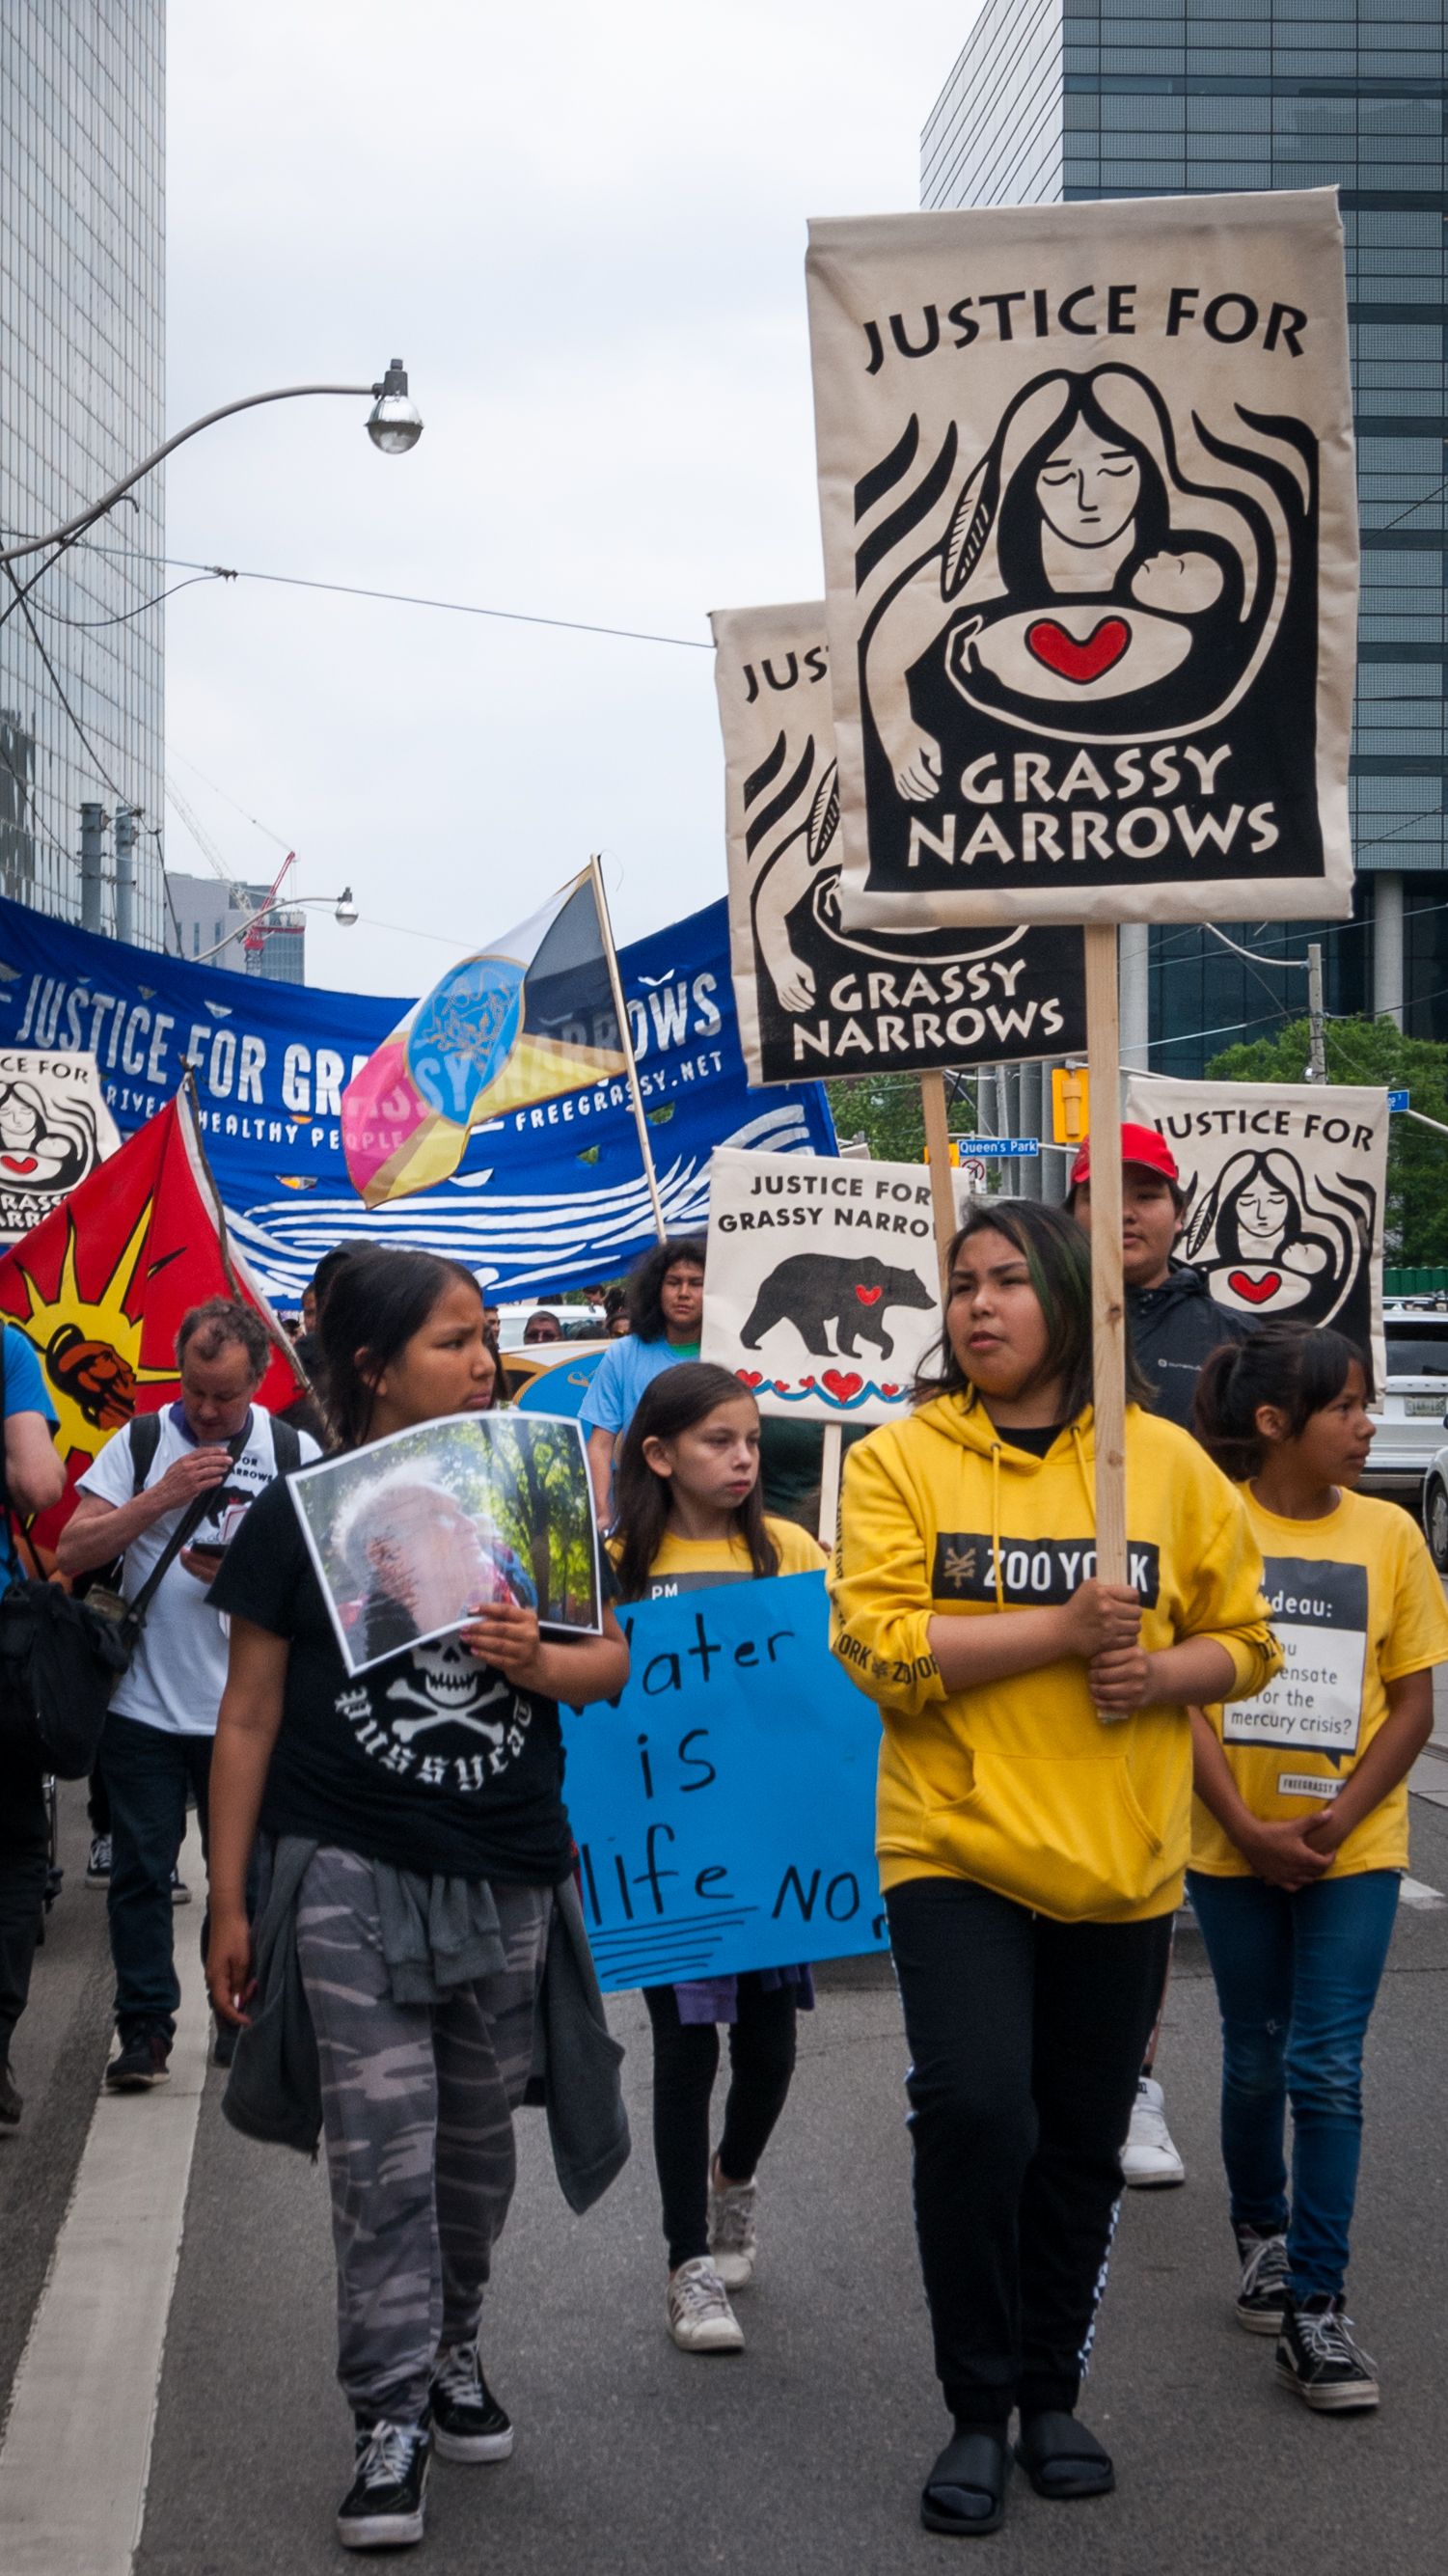 A group of Grassy Narrows girls, including Jenae Turtle (second from right), gather together as they march. Canada, 2019. Image by Shelby Gilson.